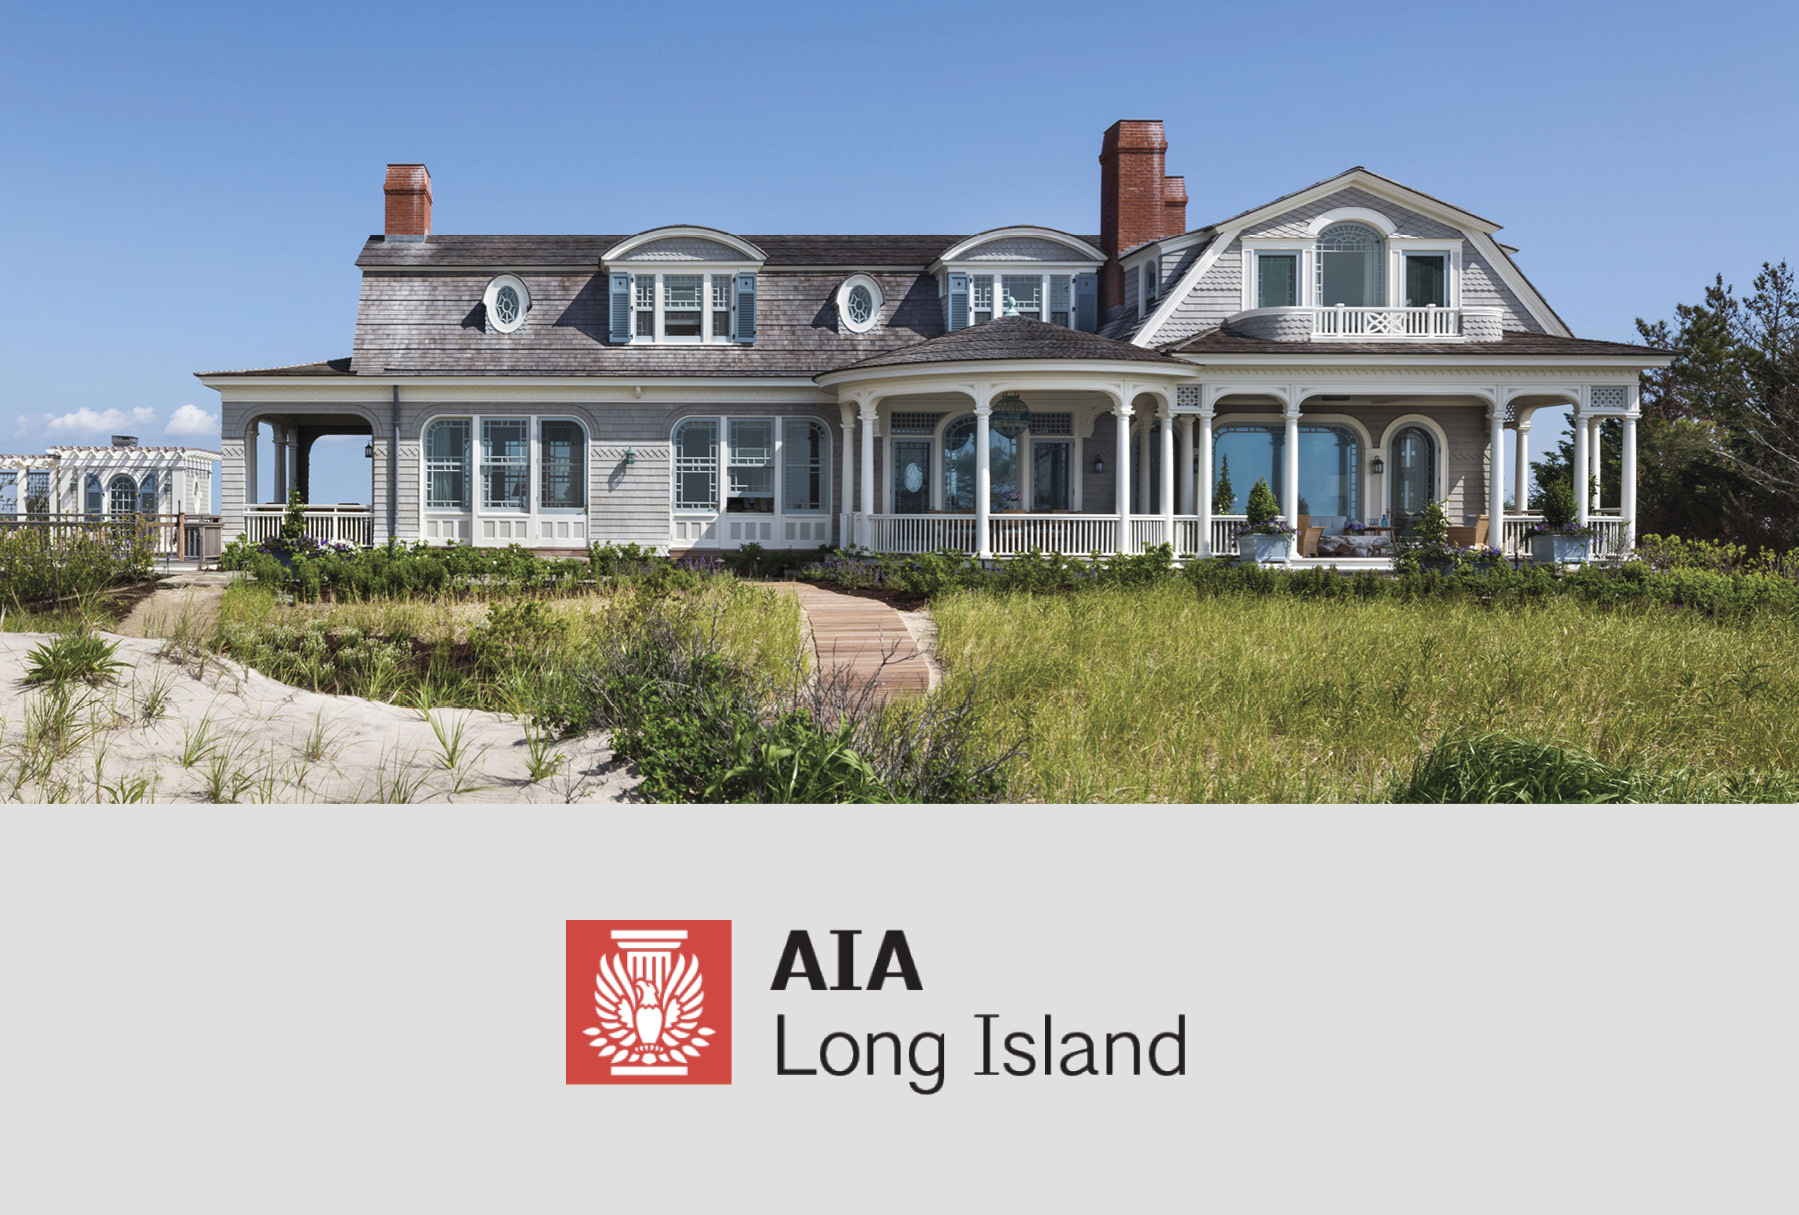 House in East Quogue Wins 2017 AIA Long Island Archi Award Commendation